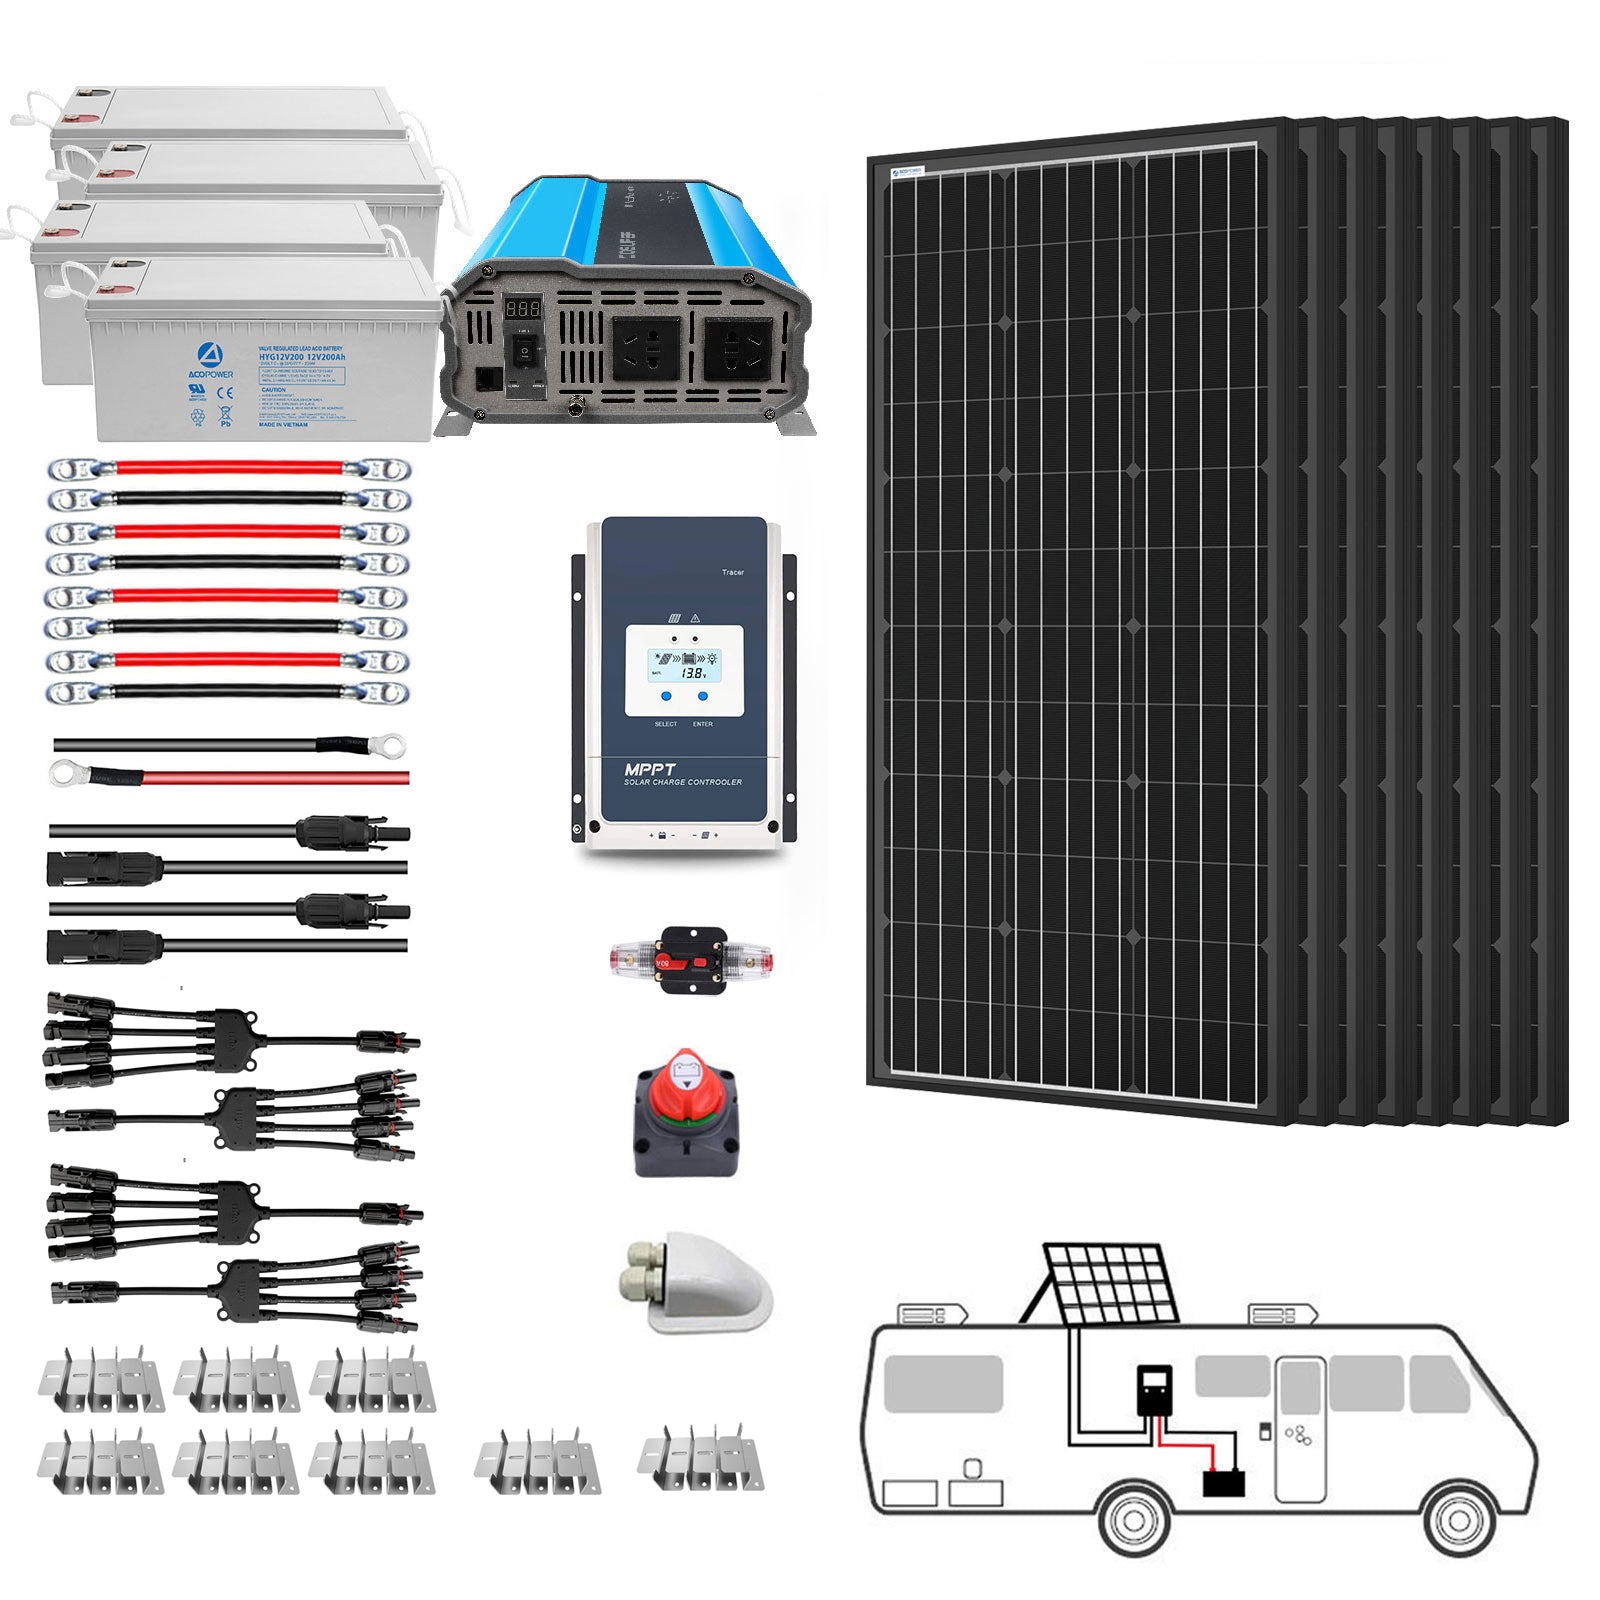 ACOPOWER Deep Cycle GEL Battery Mono Solar Power Complete System with Battery and Inverter for RV Boat 12V Off Grid Kit